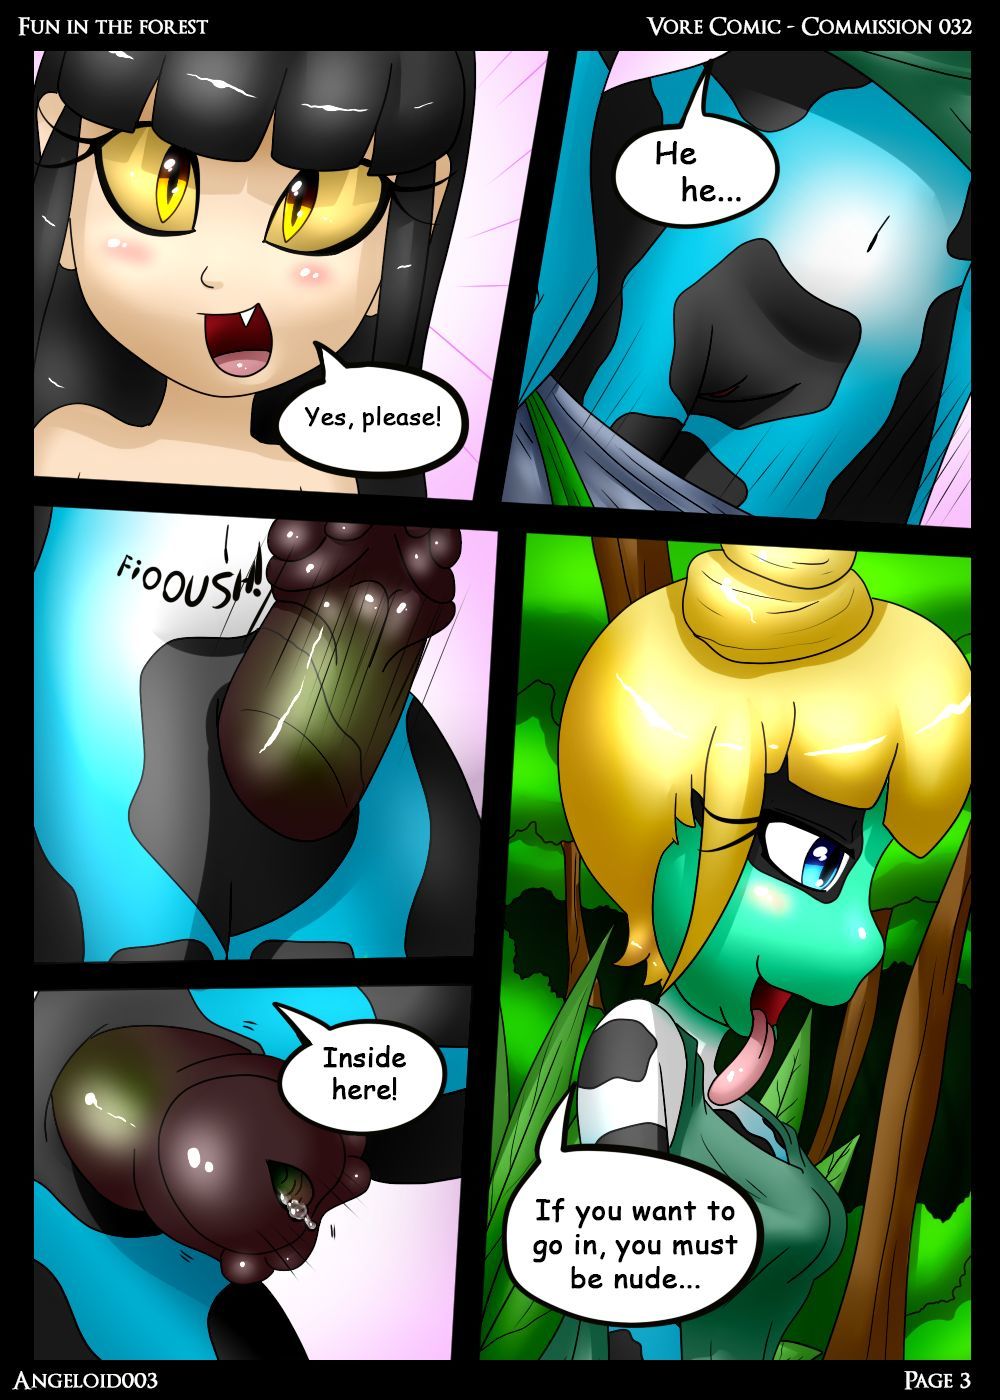 Fun in the Forest - Comm032 Angeloid003 page 3